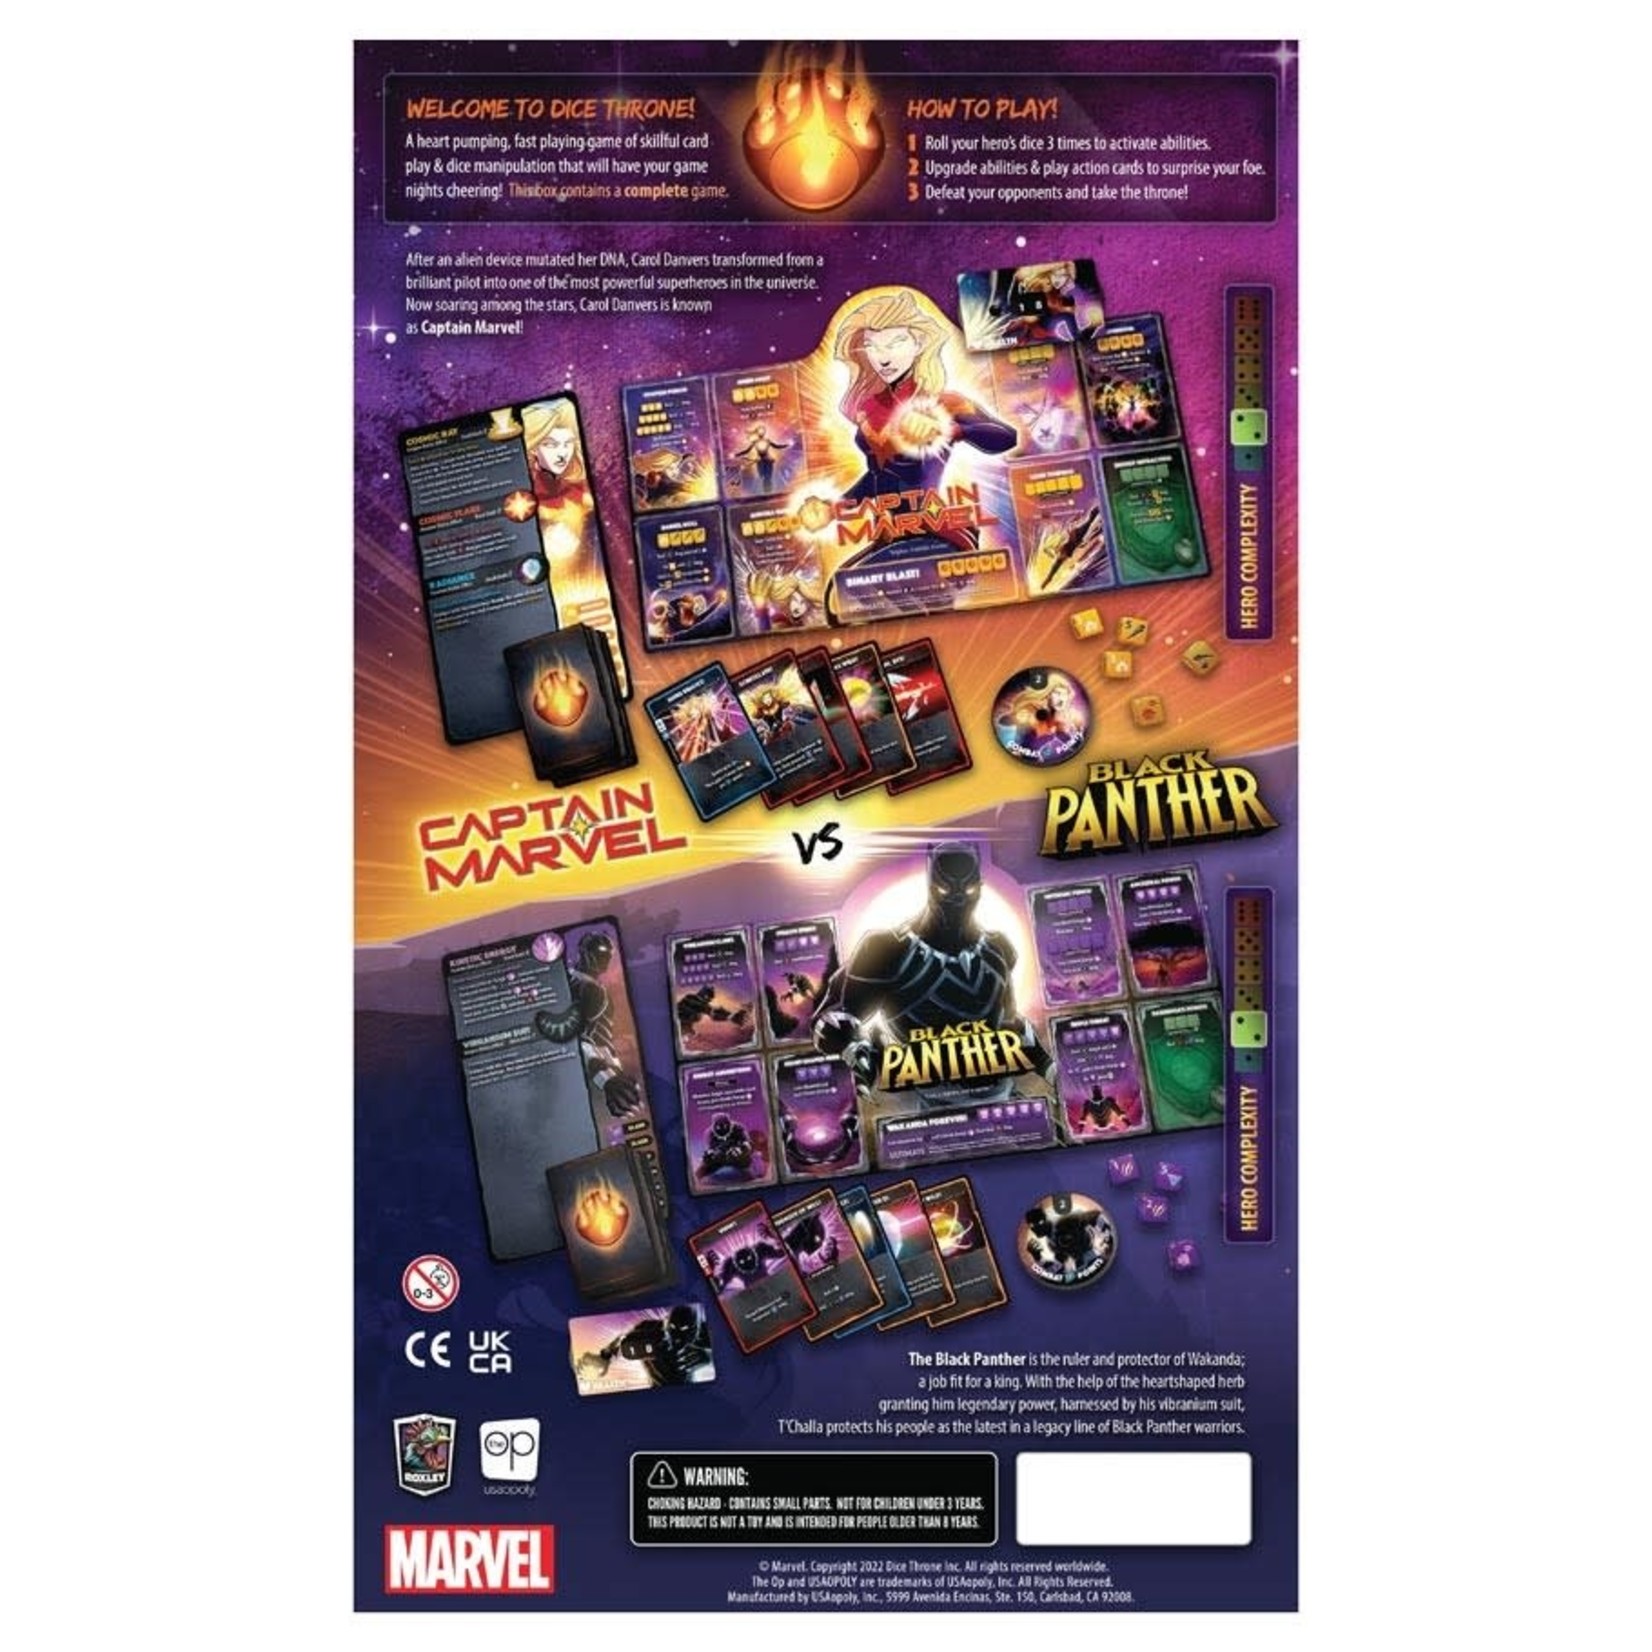 The OP-USAopoly Marvel Dice Throne: Captain Marvel vs. Black Panther